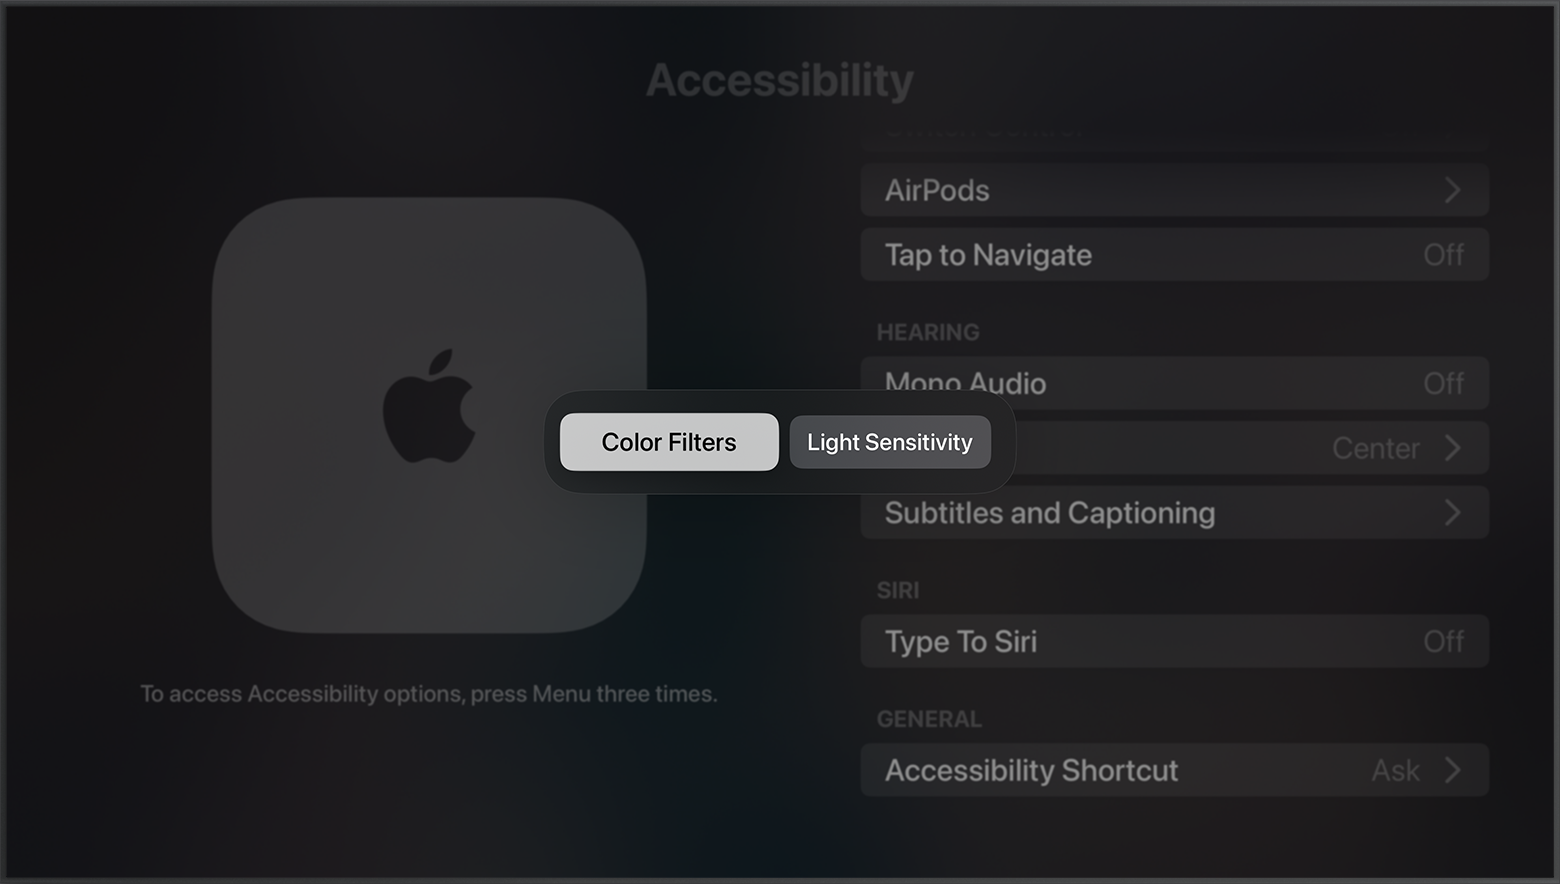 Color Filters and Light Sensitivity shortcut options appear on the Accessibility screen